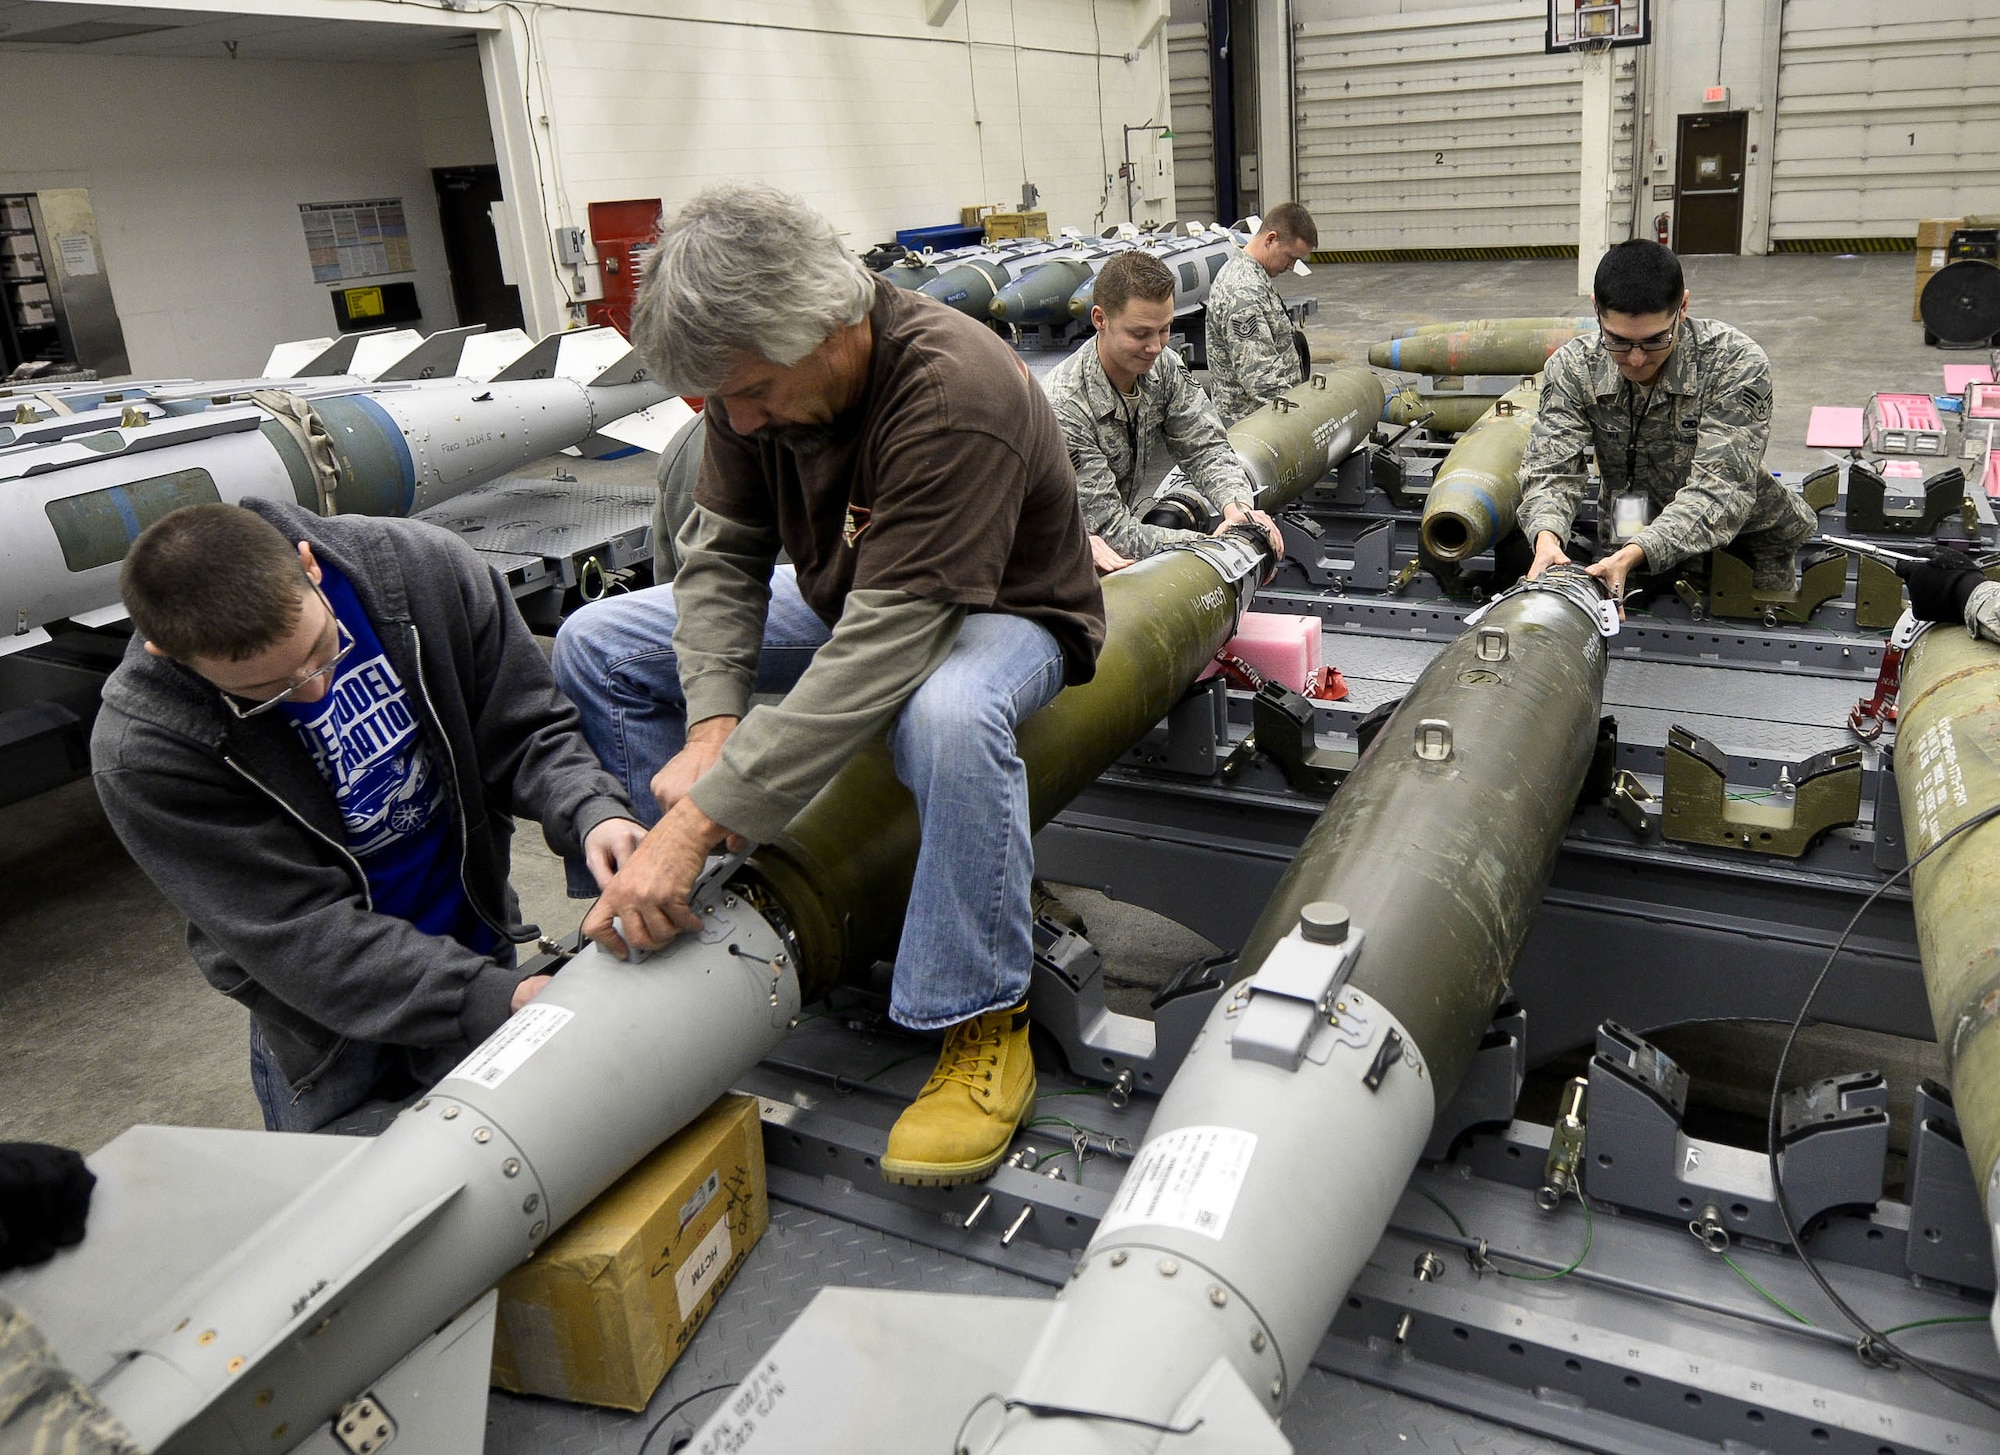 Members of the 28th Munitions Squadron assemble five GBU-31 Laser Joint Direct Attack Munitions during the Combat Hammer exercise at Ellsworth Air Force Base, S.D., Feb. 11, 2014. The squadron inspects and assembles more than 1,707 munitions annually, ensuring Ellsworth B-1 bomber aircrews have the payloads necessary to meet taskings anywhere on the globe. (U.S. Air Force photo by Senior Airman Zachary Hada/Released)